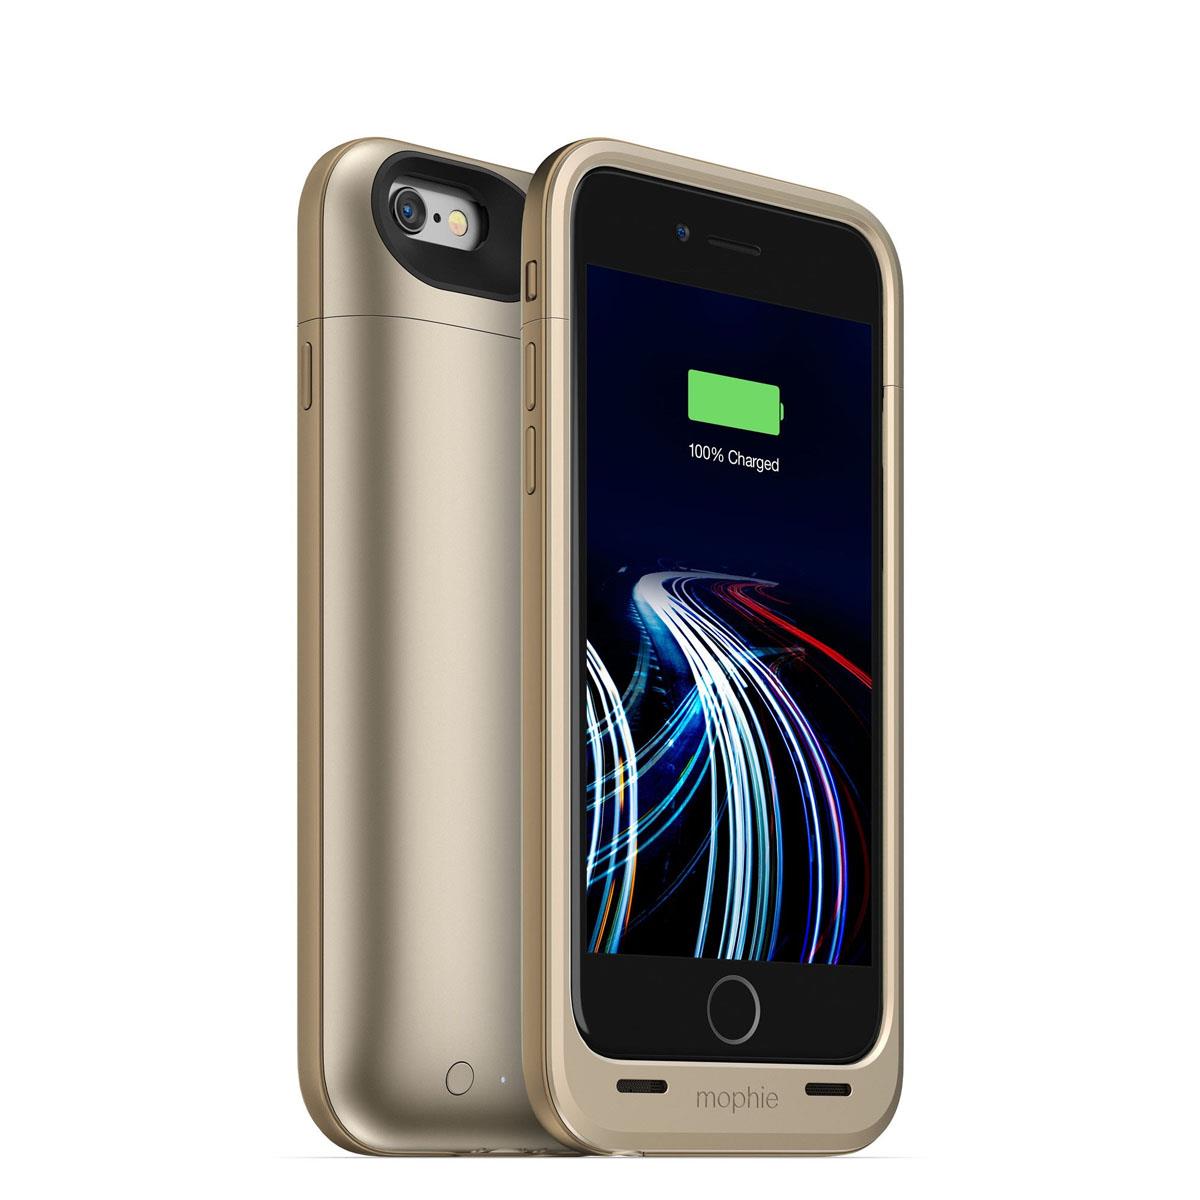 Mophie Juice Pack Ultra 3950mAh iPhone 6 Battery Charger Case (Gold)